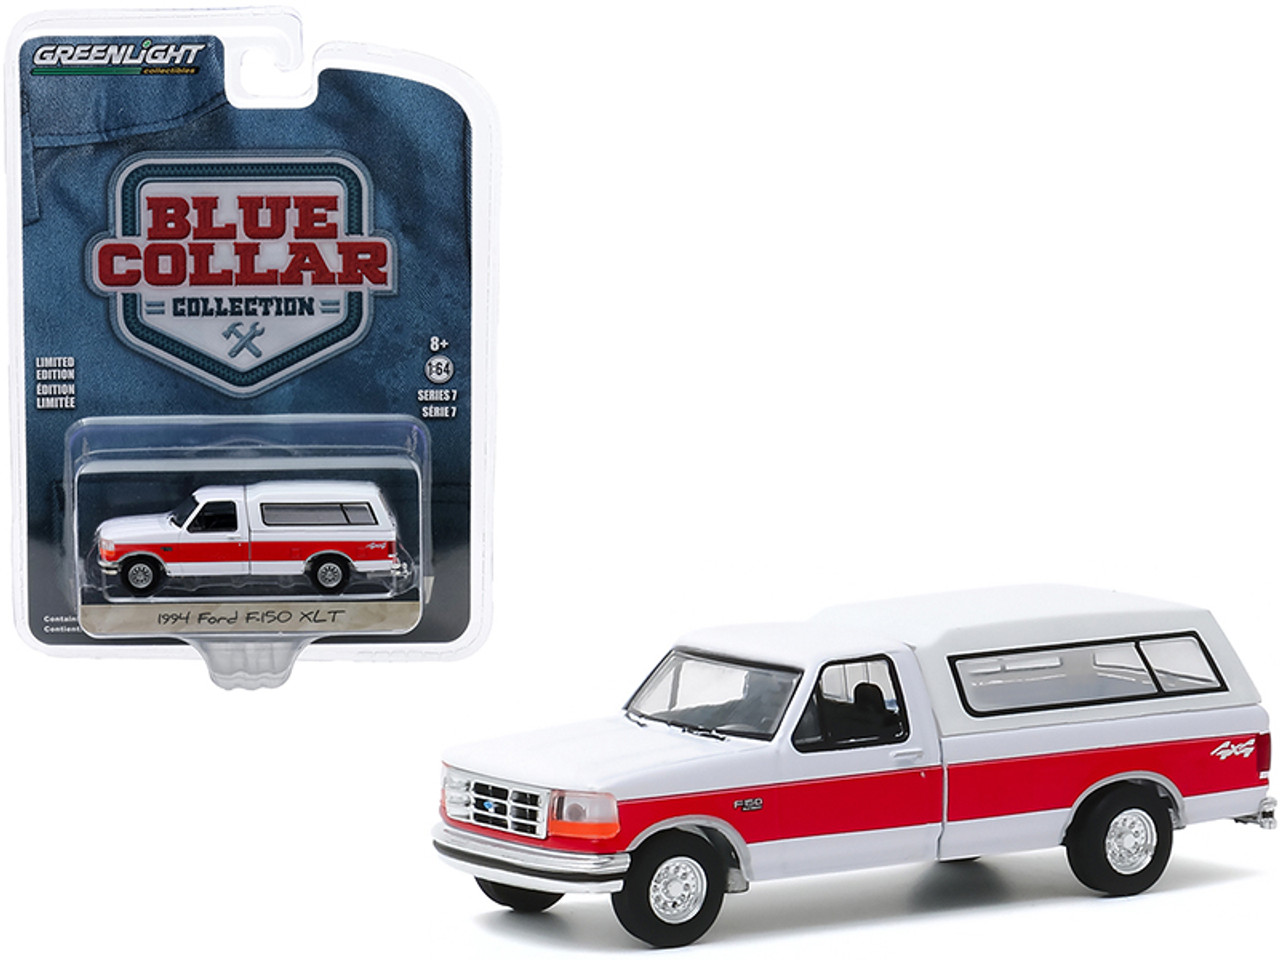 1994 Ford F-150 XLT 4x4 Pickup Truck with Camper Shell White with Red Stripe "Blue Collar Collection" Series 7 1/64 Diecast Model Car by Greenlight